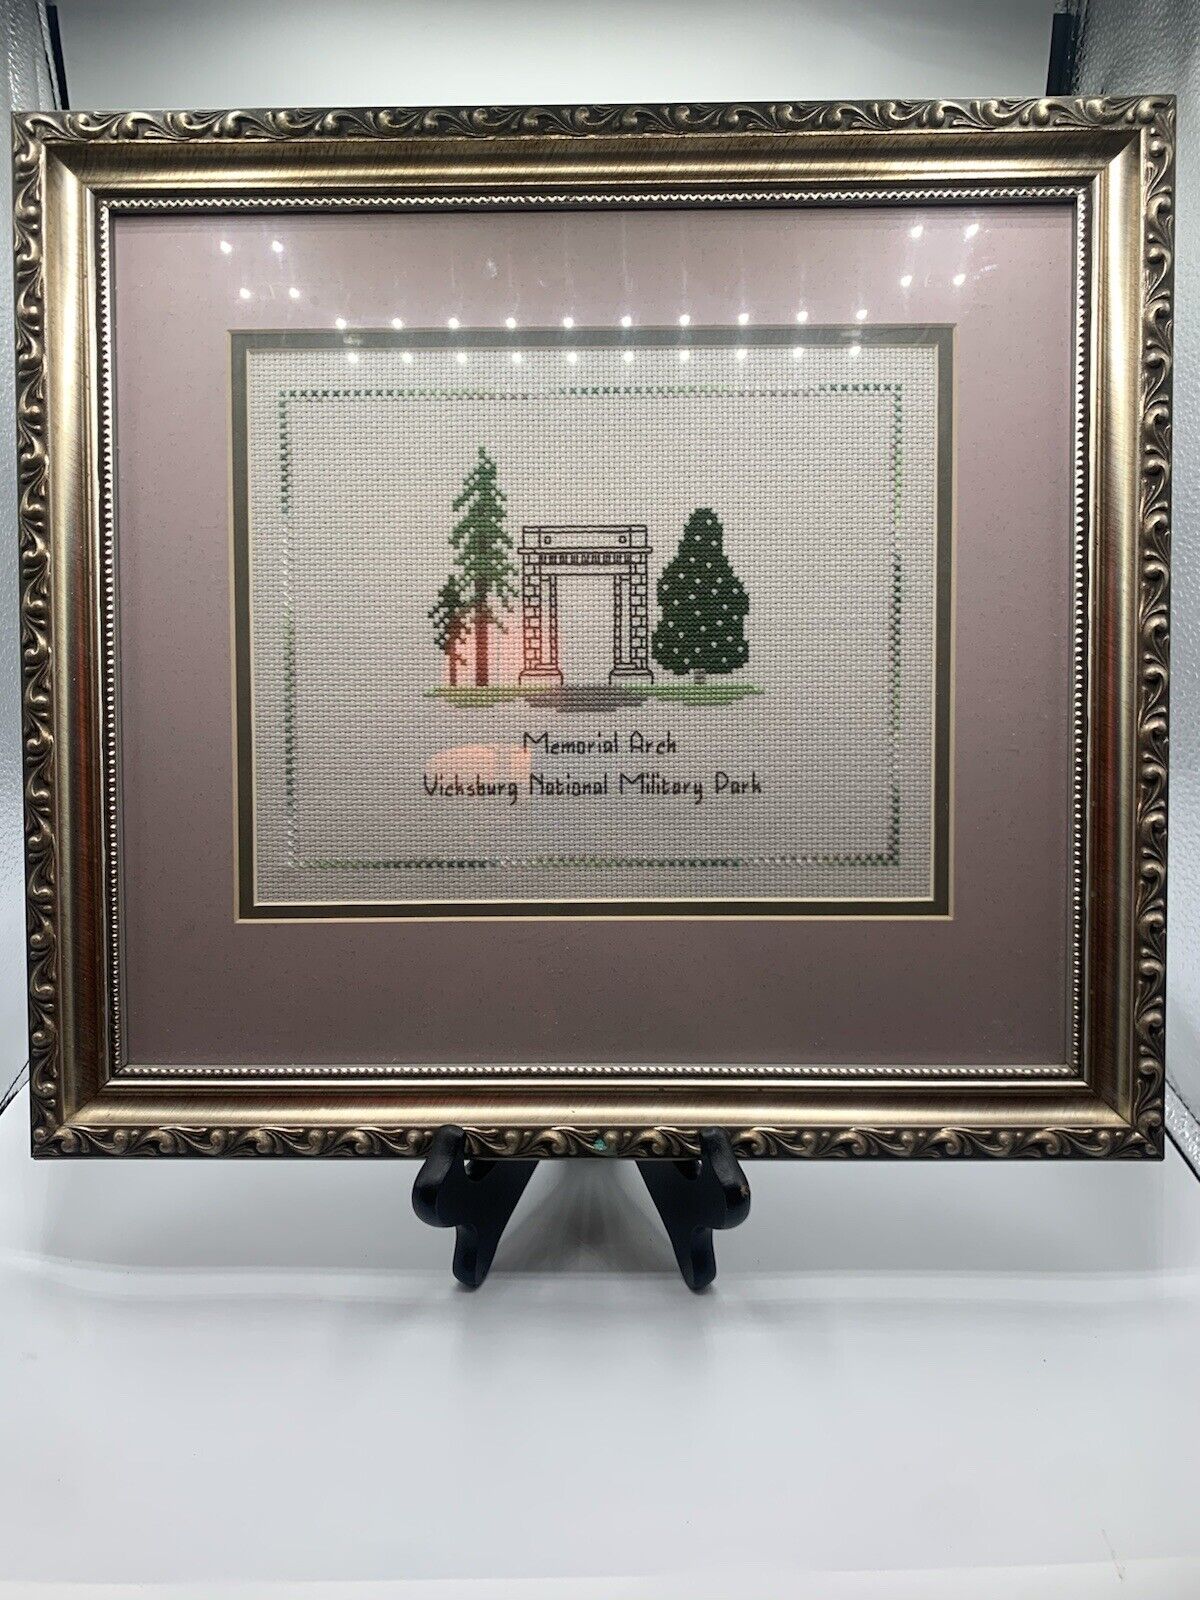 Matted & Framed Cross Stitch Embroidery Vicksburg, MS National Military Park